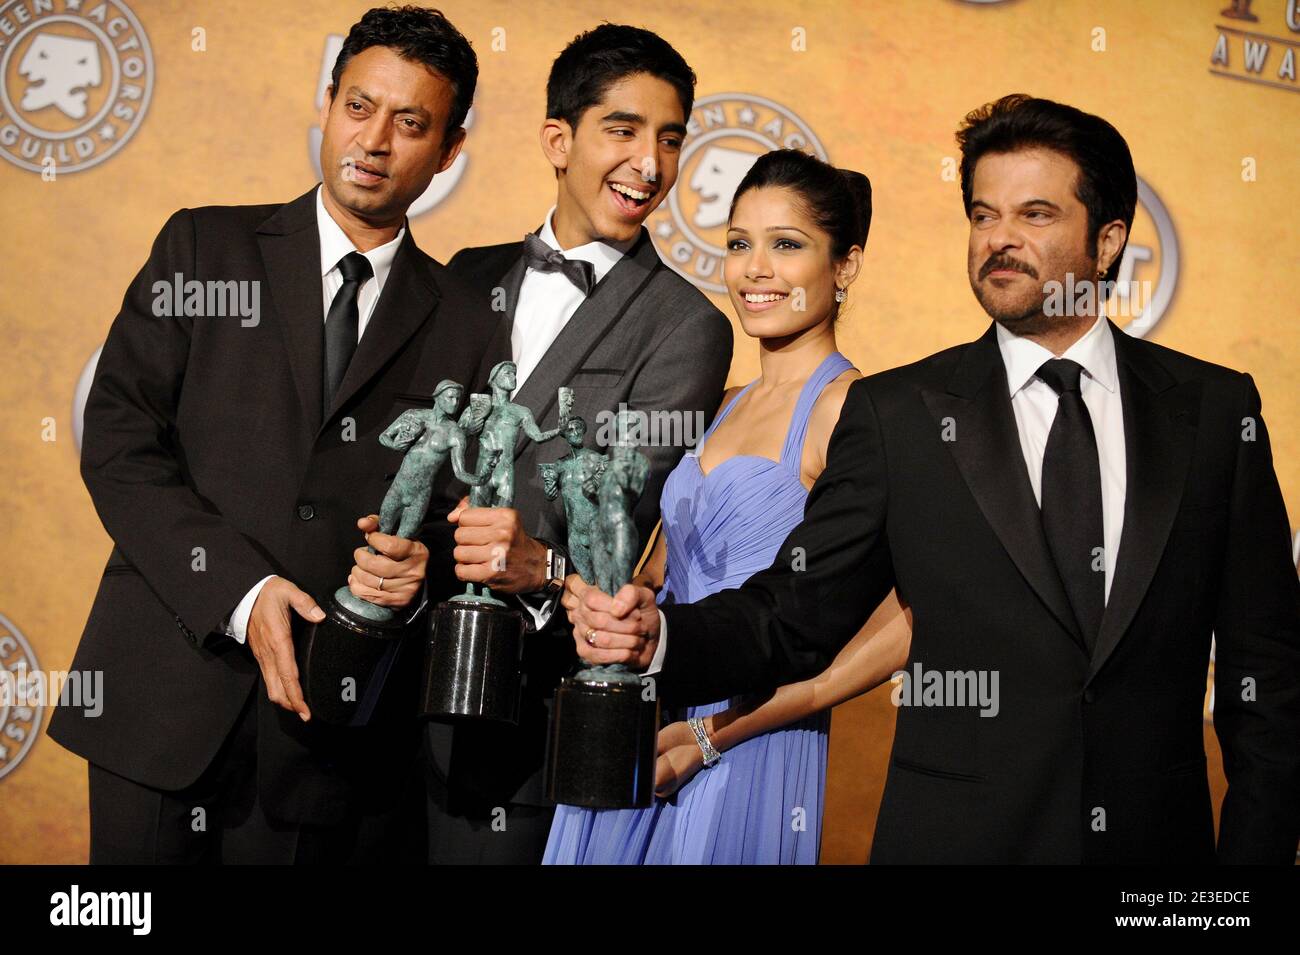 Irrfan Khan, Dev Patel, Freida Pinto, and Anil Kapoor posing in the press room of the 15th Screen Actors Guild Awards held at the Shrine Auditorium in Los Angeles, CA, USA on January 25, 2009. Photo by Lionel Hahn/ABACAPRESS.COM Stock Photo